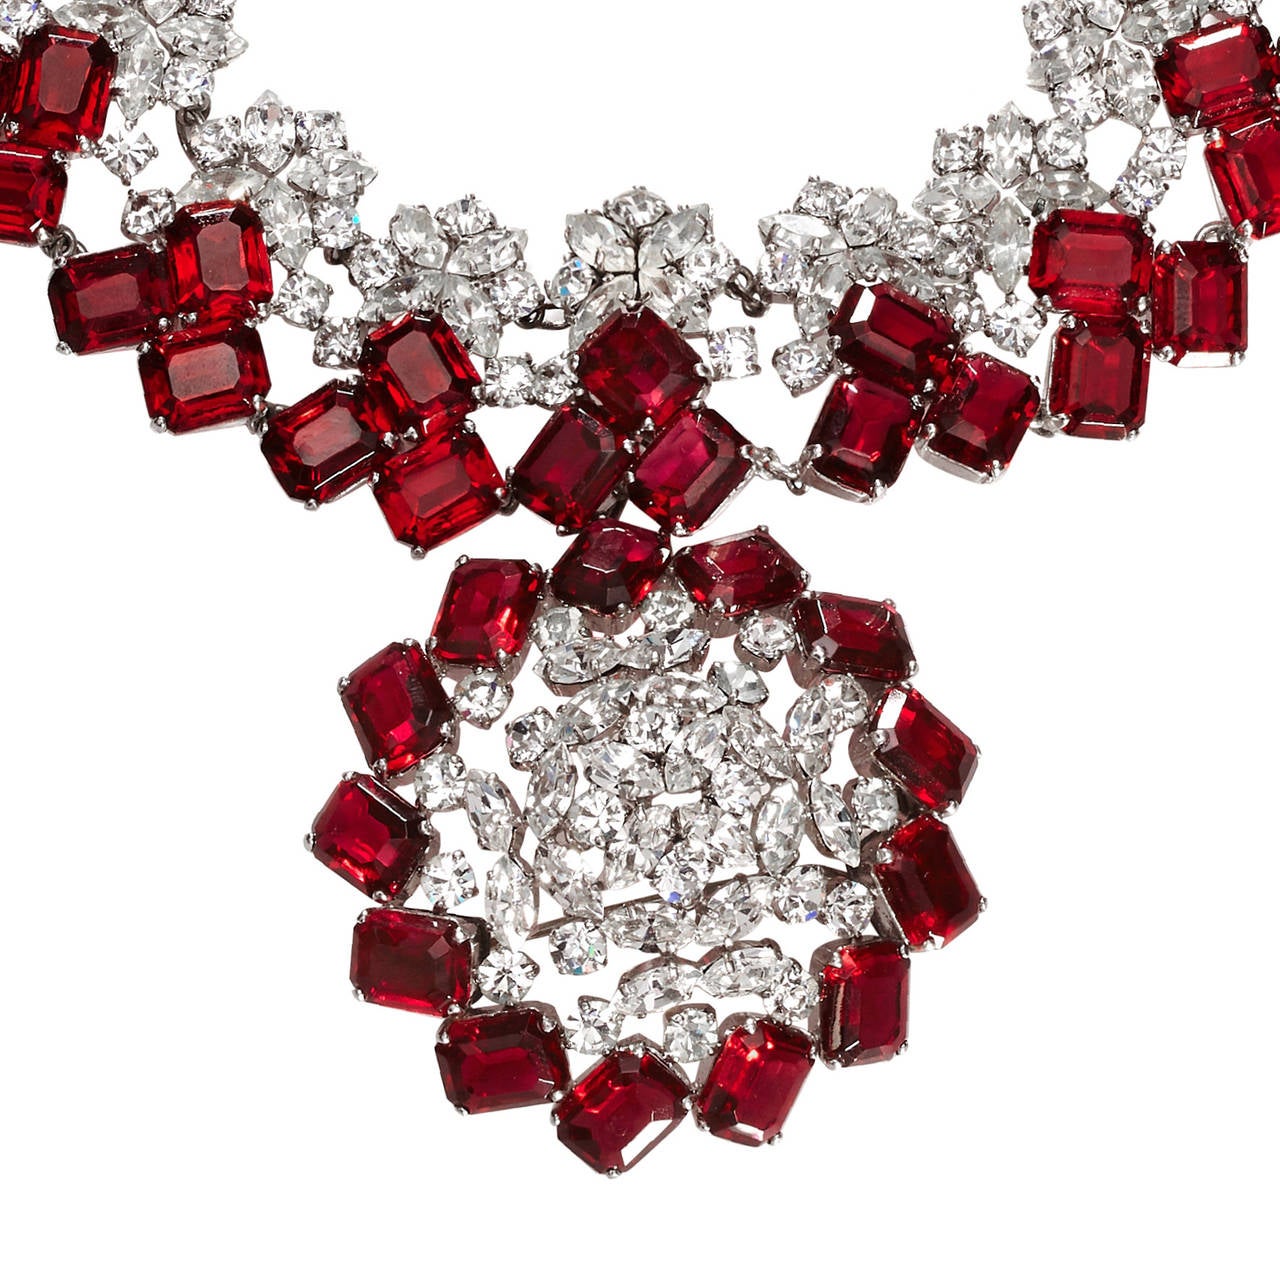 The most exquisite piece in the Passionate About Vintage collection and fit for a Queen!

This sensational choker necklace is a heavy and solid piece, beautifully crafted. It is Rhodium plated and made up of 17 articulated sections. The Ruby